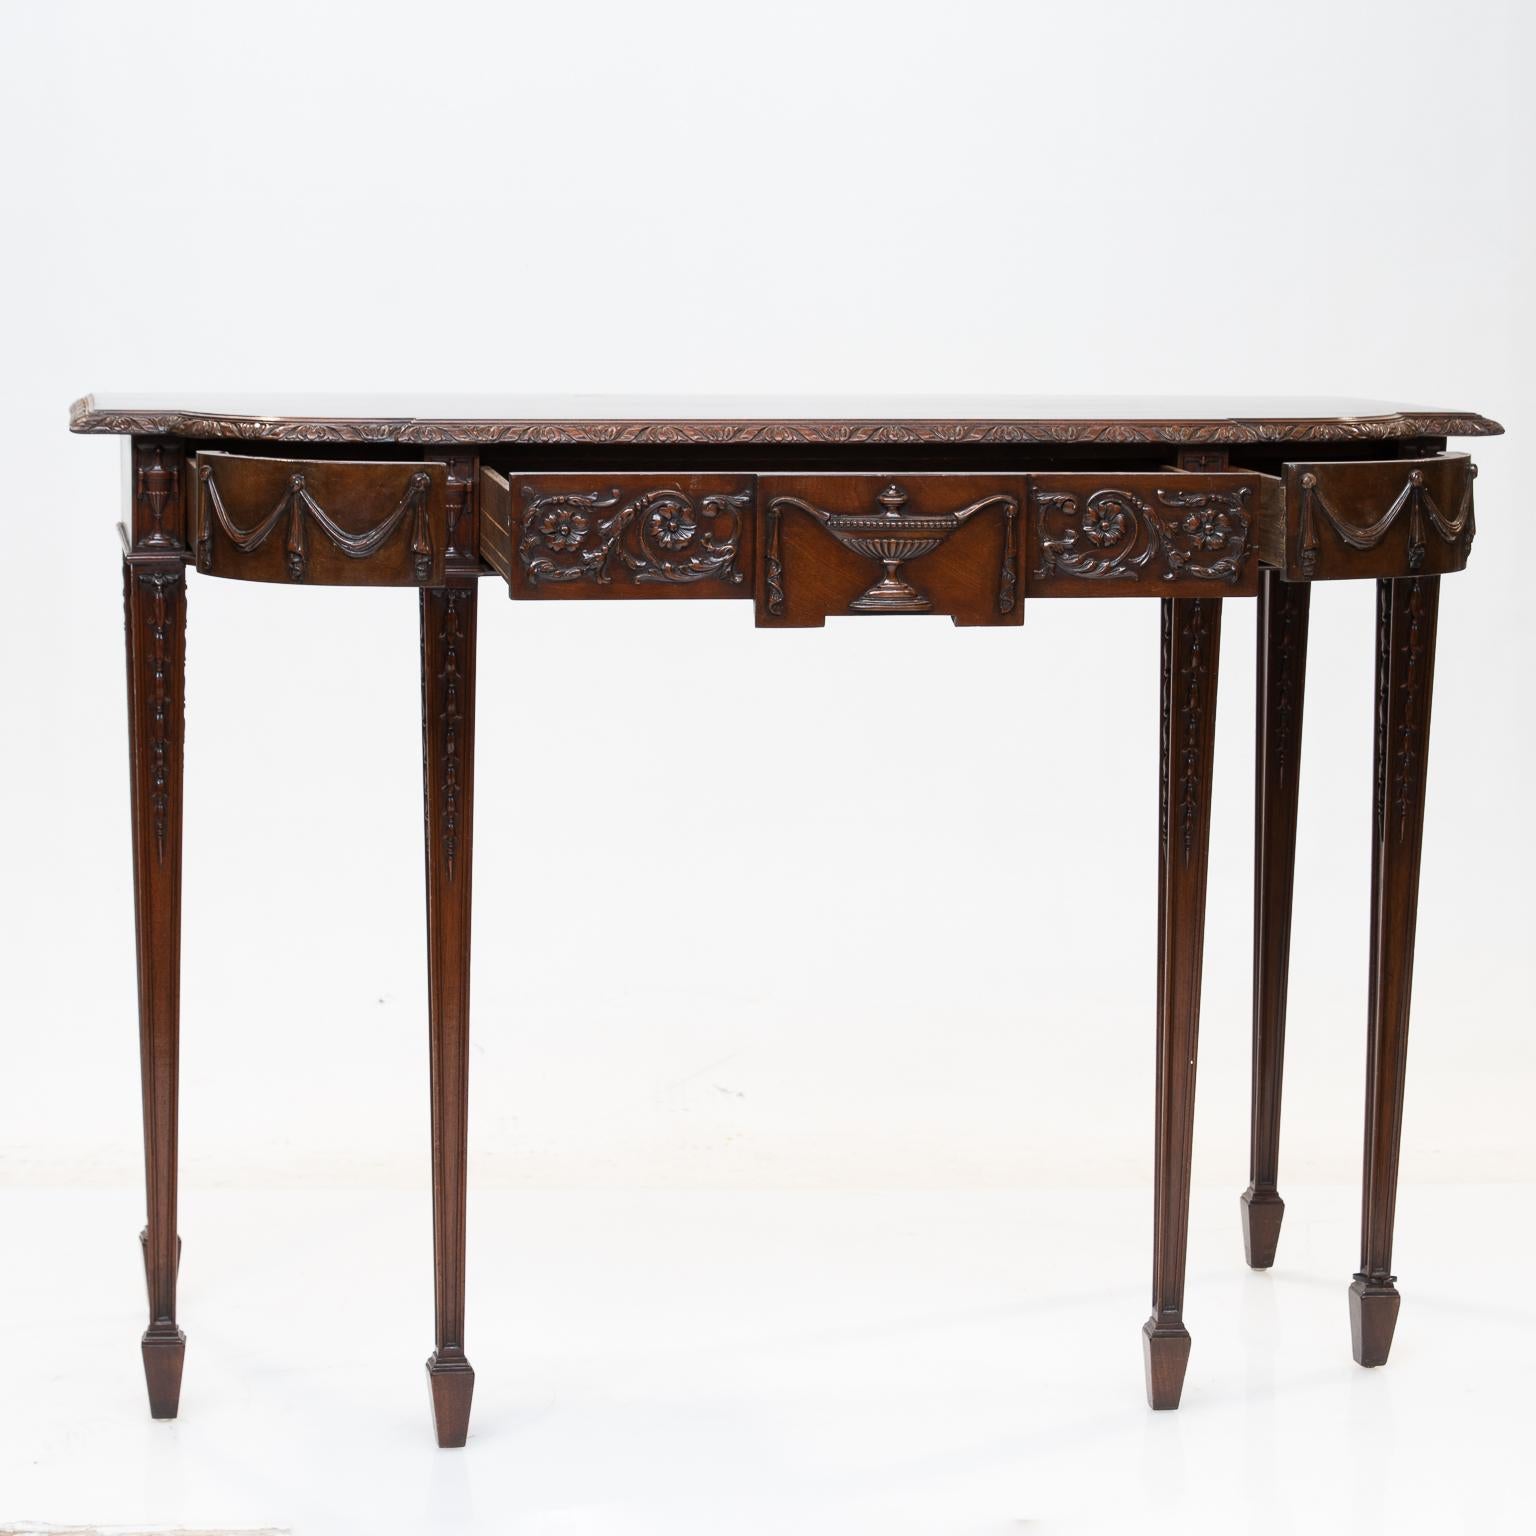 This console is in the style of Robert Adams. English made from choice mahogany wood. Solid mahogany top and carved edge molding. Carved front which reveals three drawers. A larger centre drawer with an urn surrounded with foliage carvings. The two